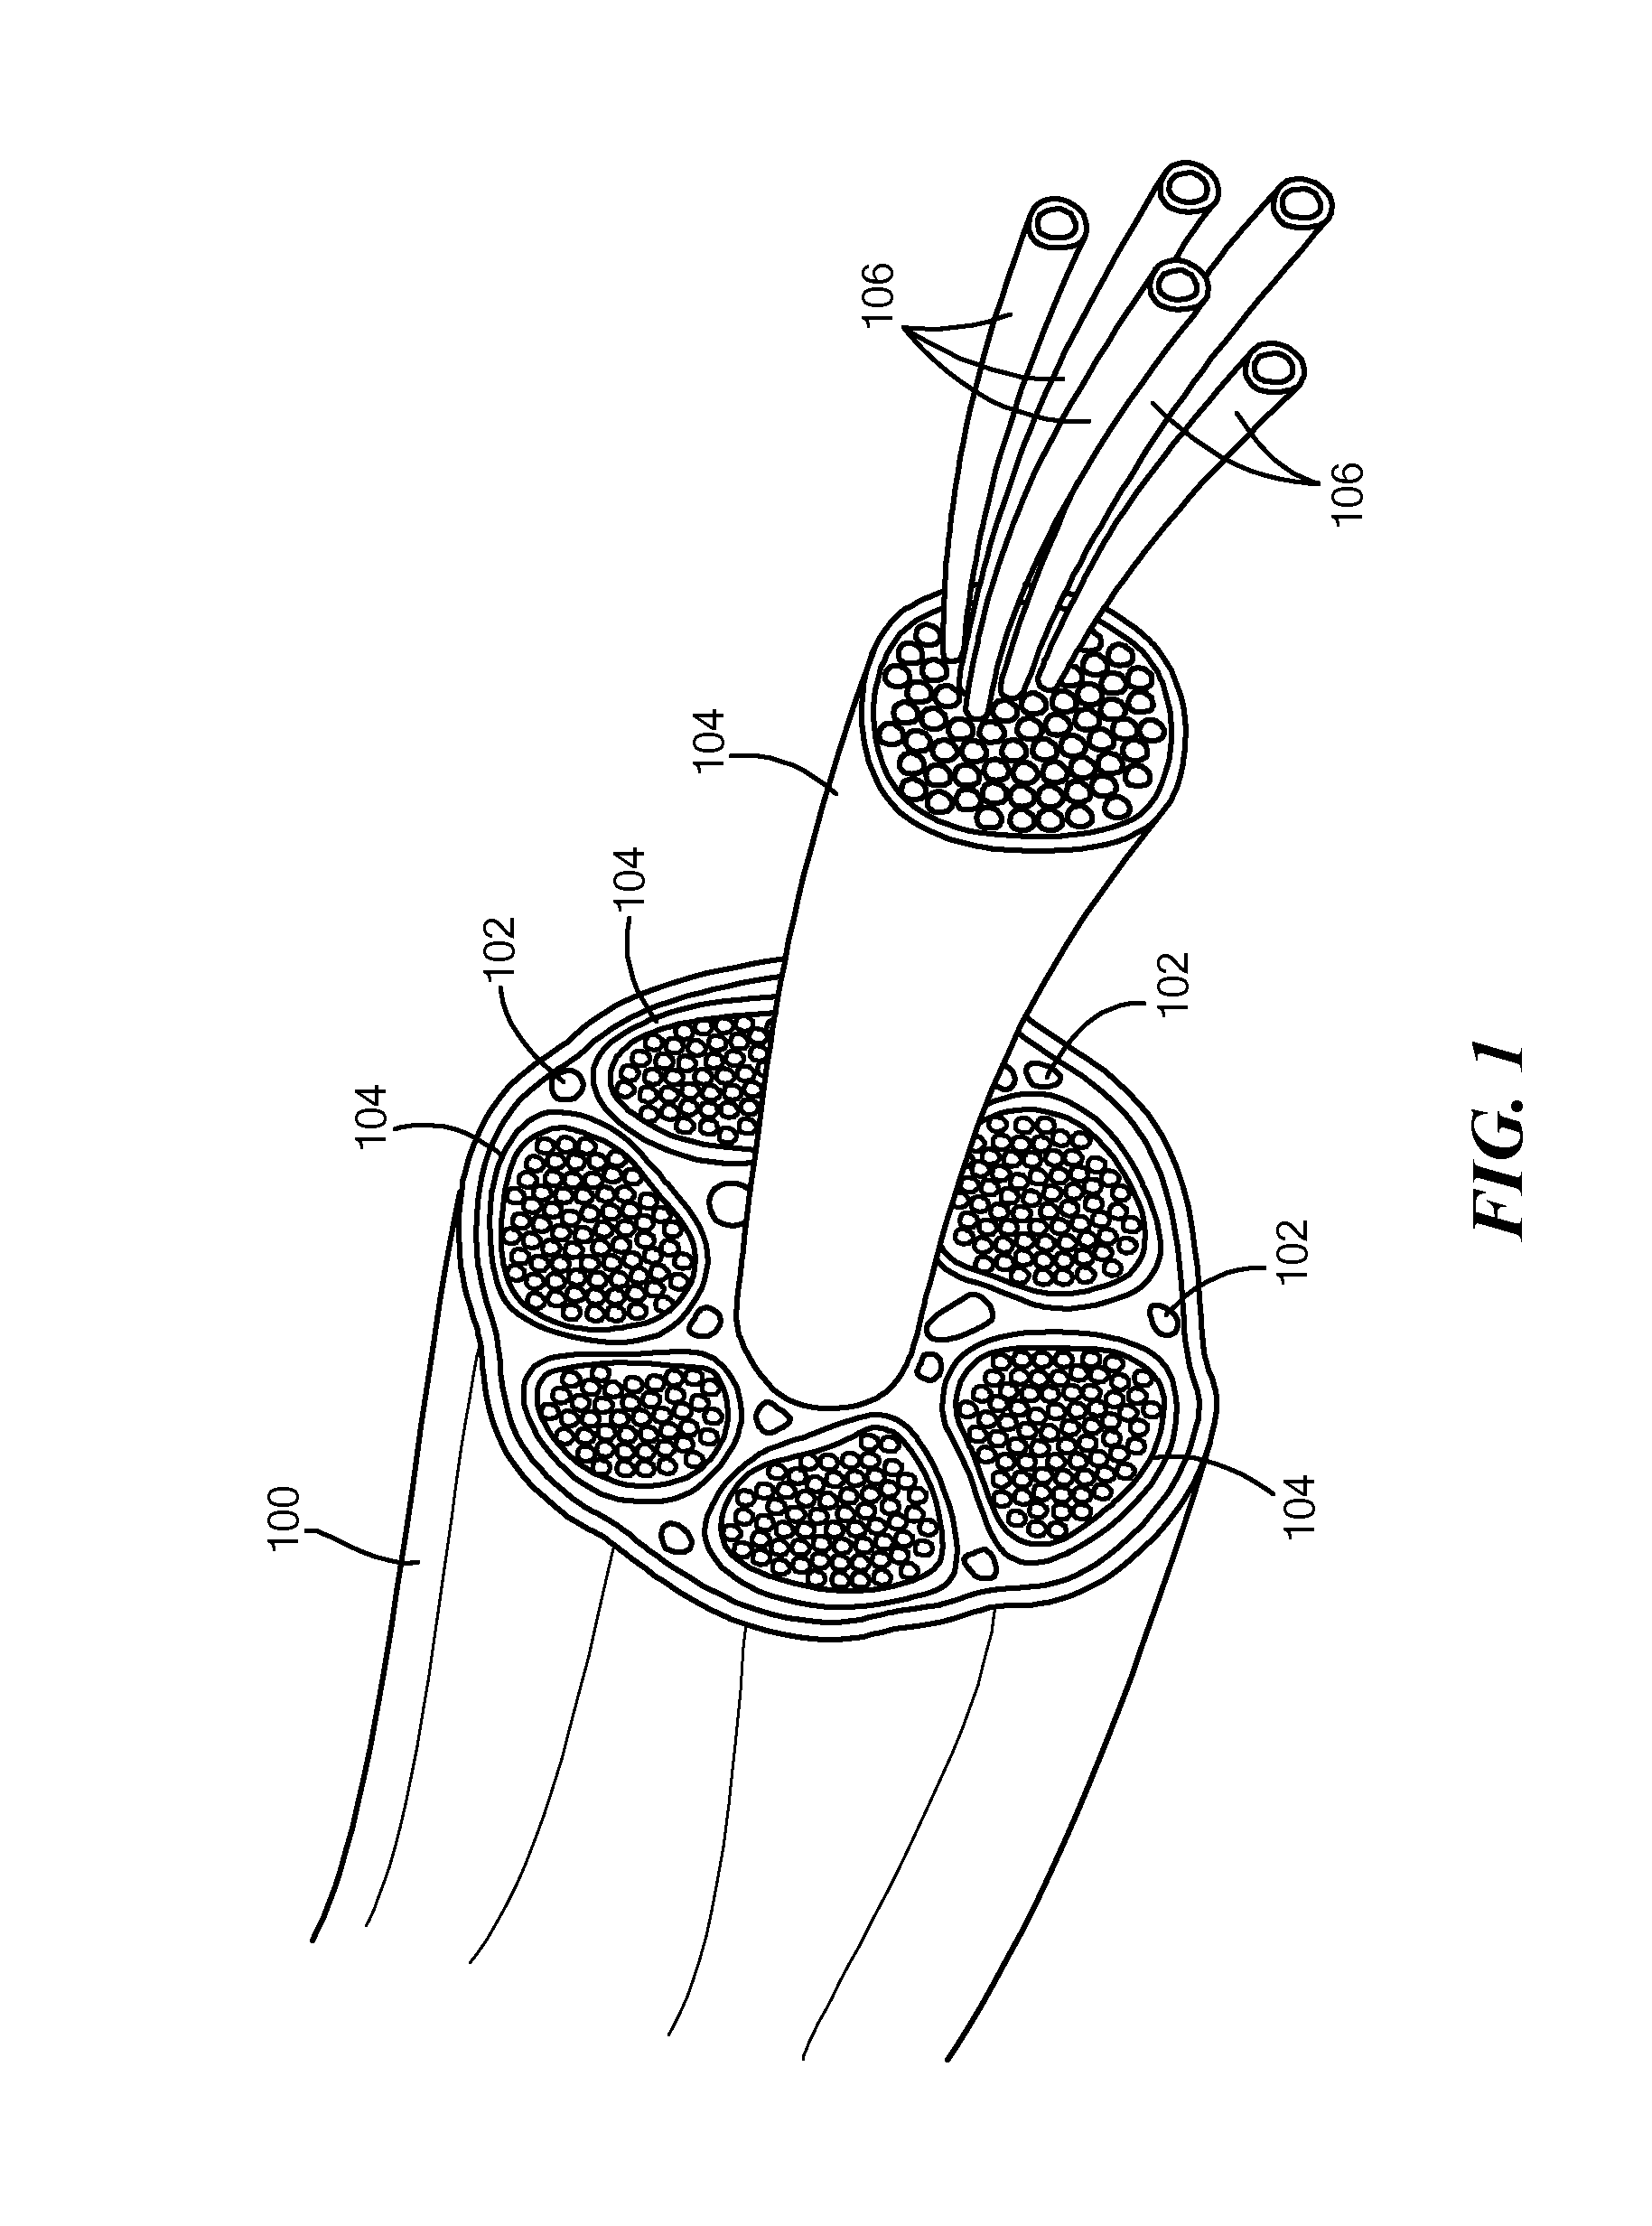 Multi-Layered Micro-Channel Electrode Array with Regenerative Selectivity